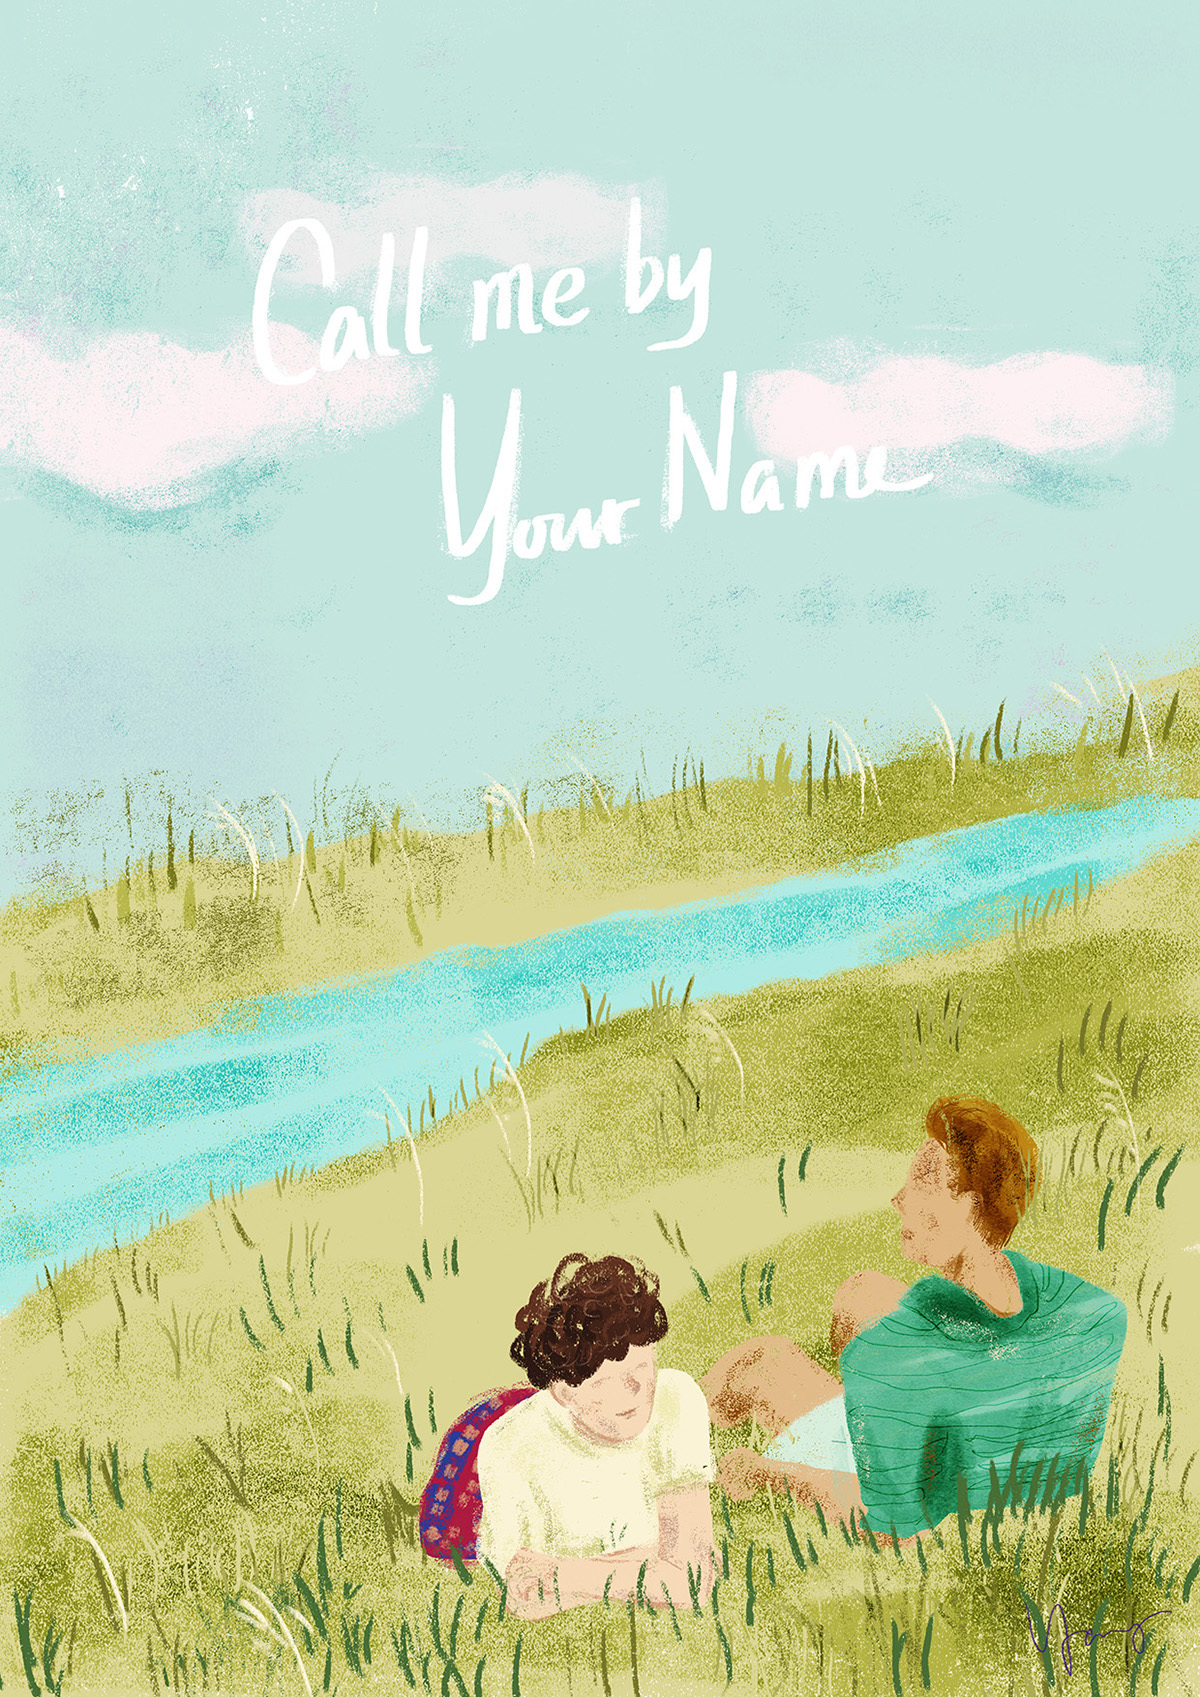 your name wallpaper,people in nature,text,summer,happy,grass